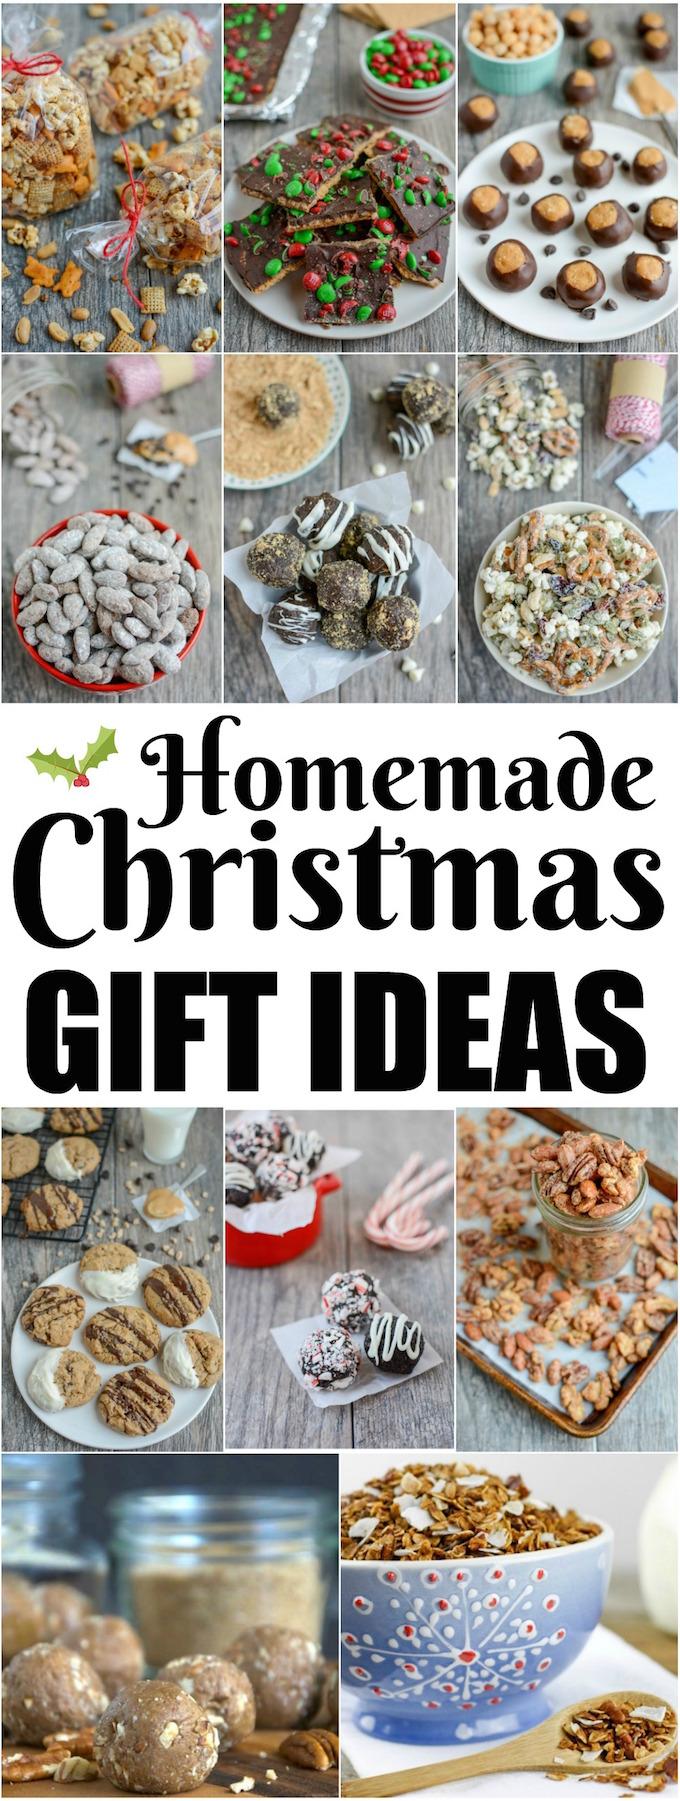 These Homemade Edible Christmas Gift Ideas are simple and delicious. Great for friends, coworkers, teachers and more this holiday season!